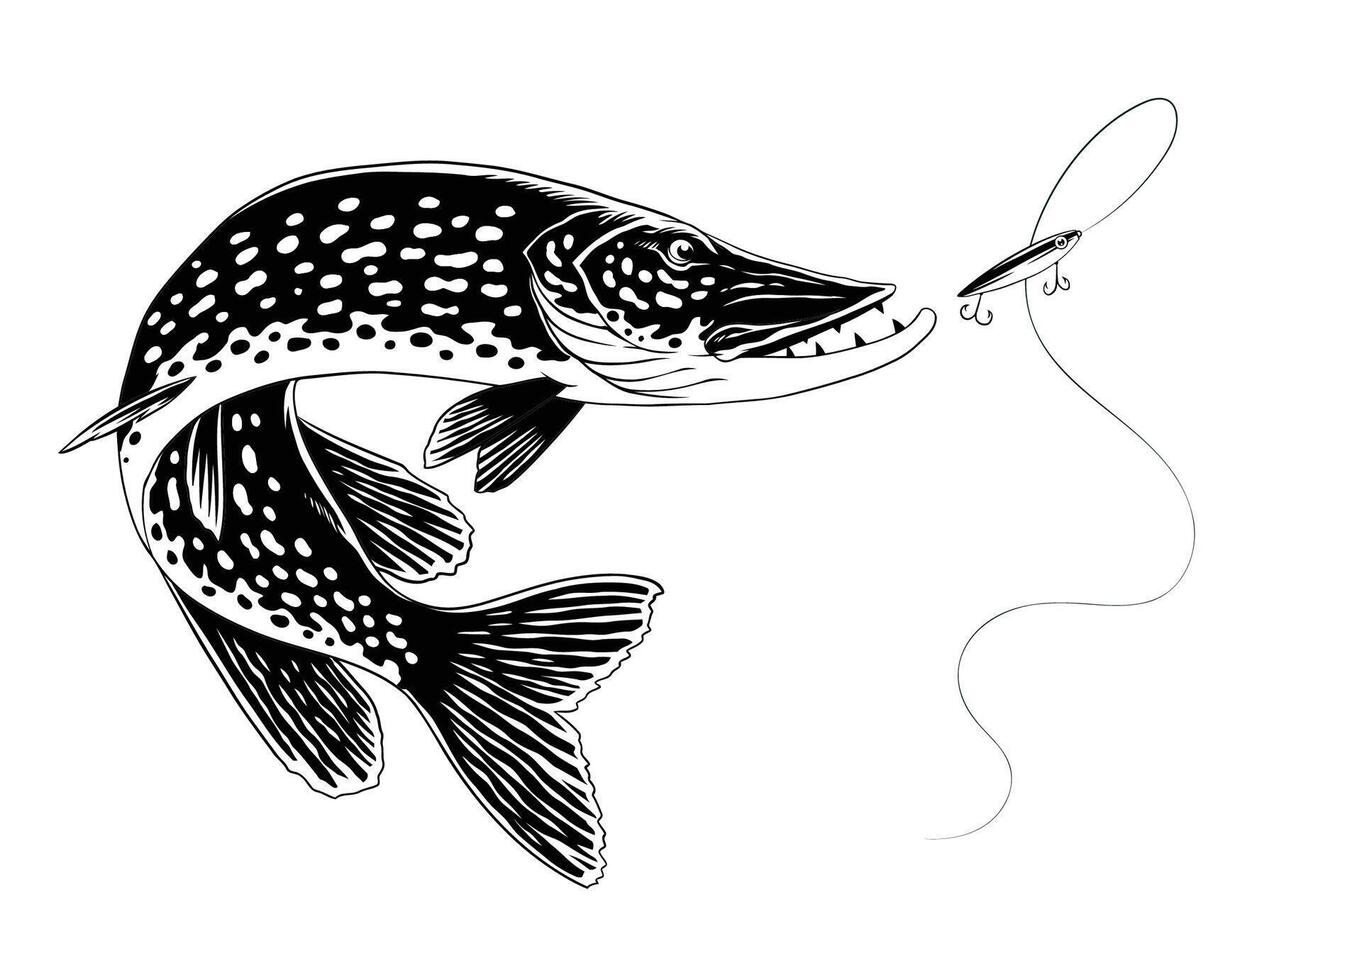 Pike Fish Illustration in Vintage Hand Drawn Style vector